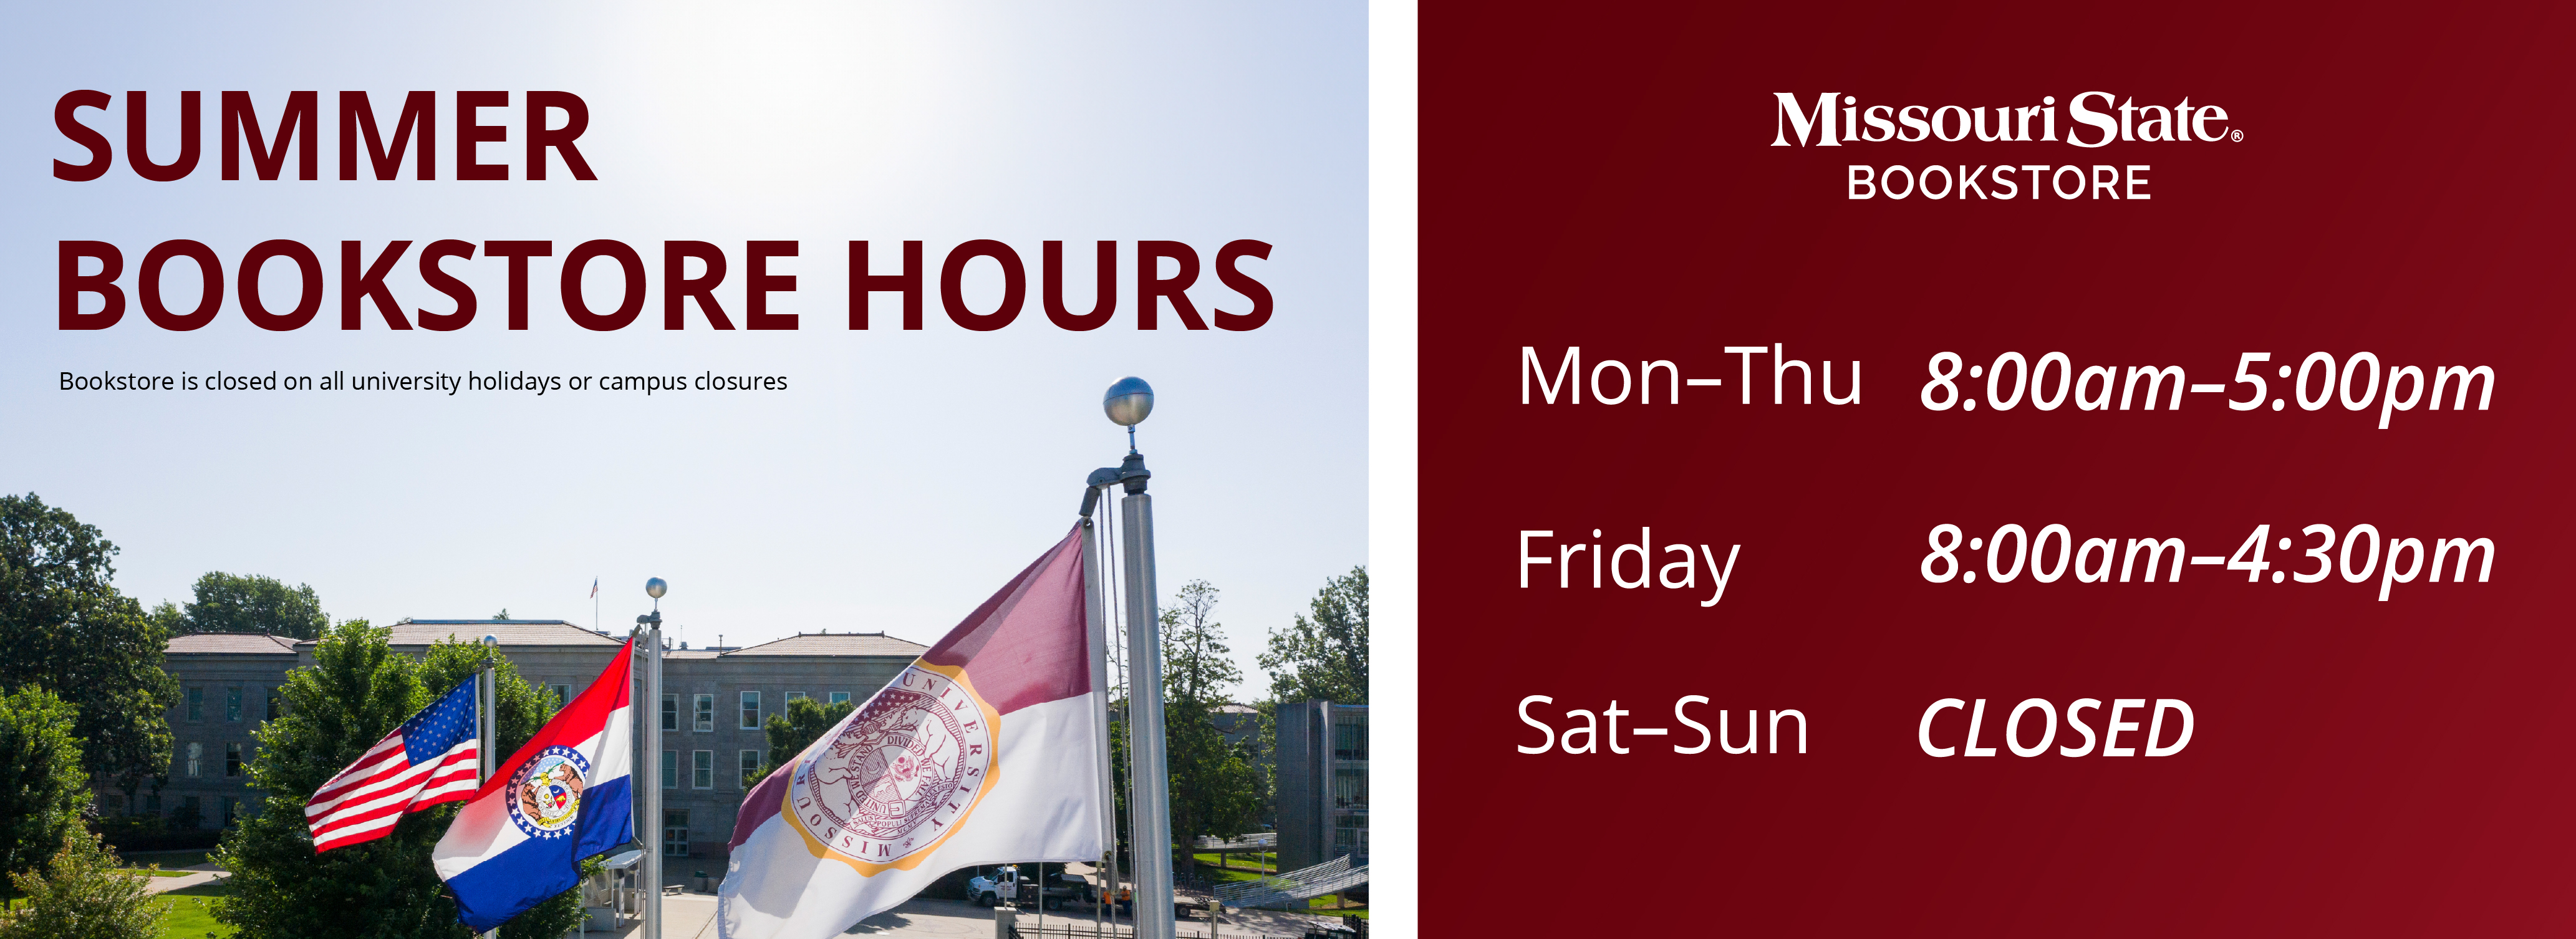 Summer Bookstore Hours, Bookstore is closed on all university holidays and campus closures. Monday - Thursday 8:00 am - 5:00 pm, Friday 8:00 am - 4:30 pm. Saturday and Sunday Closed.